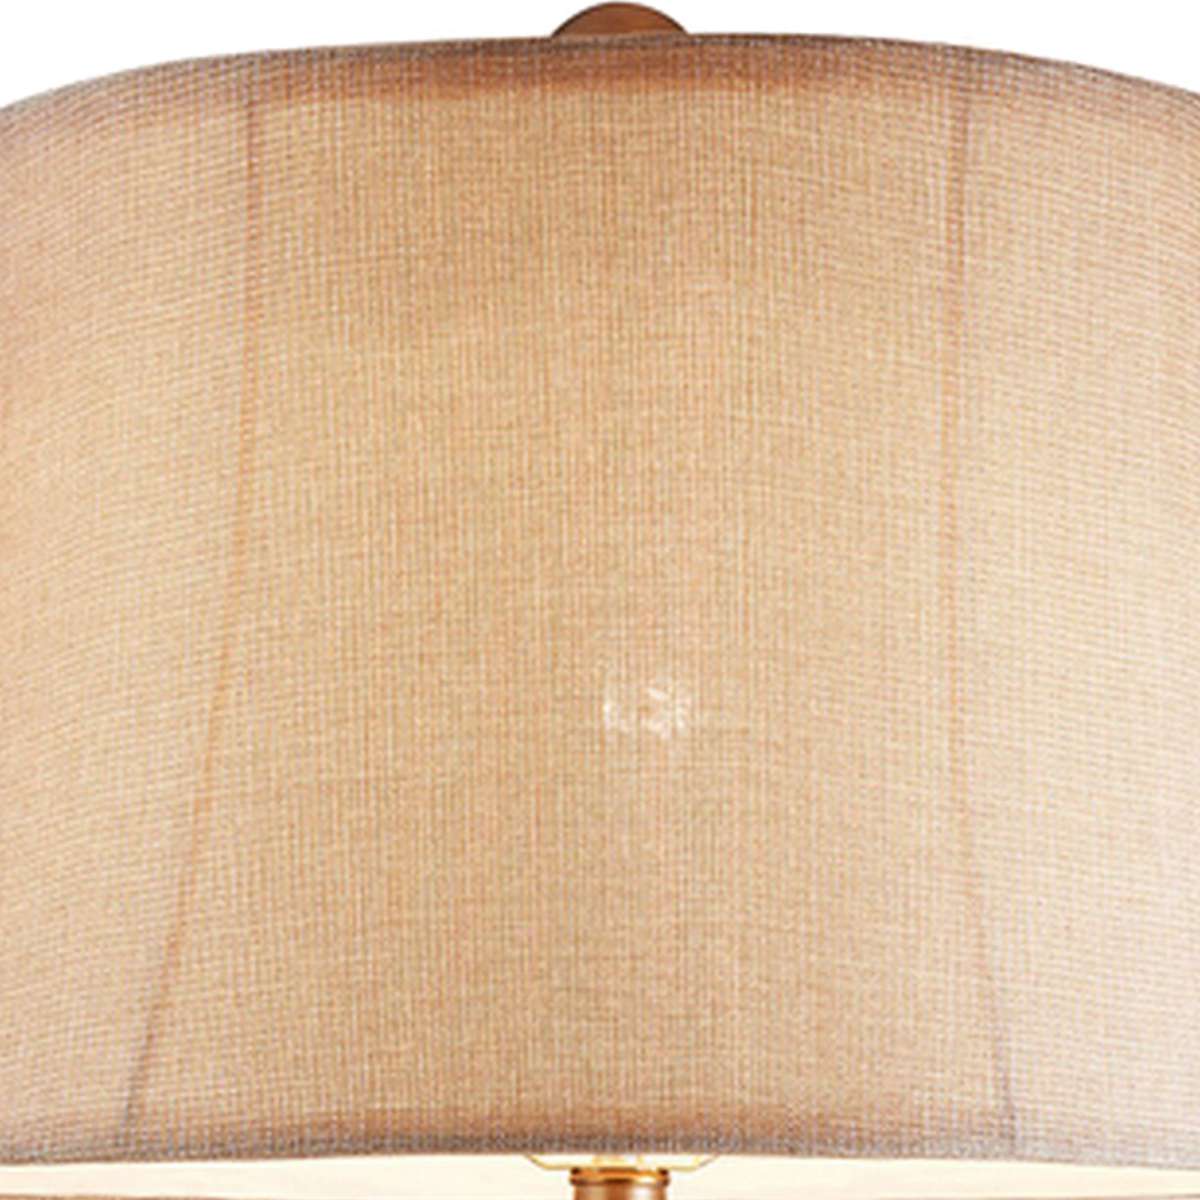 Benzara Table Lamp With Filigree Accent Base And Fabric Shade, Brown By Benzara Table Lamps BM240299